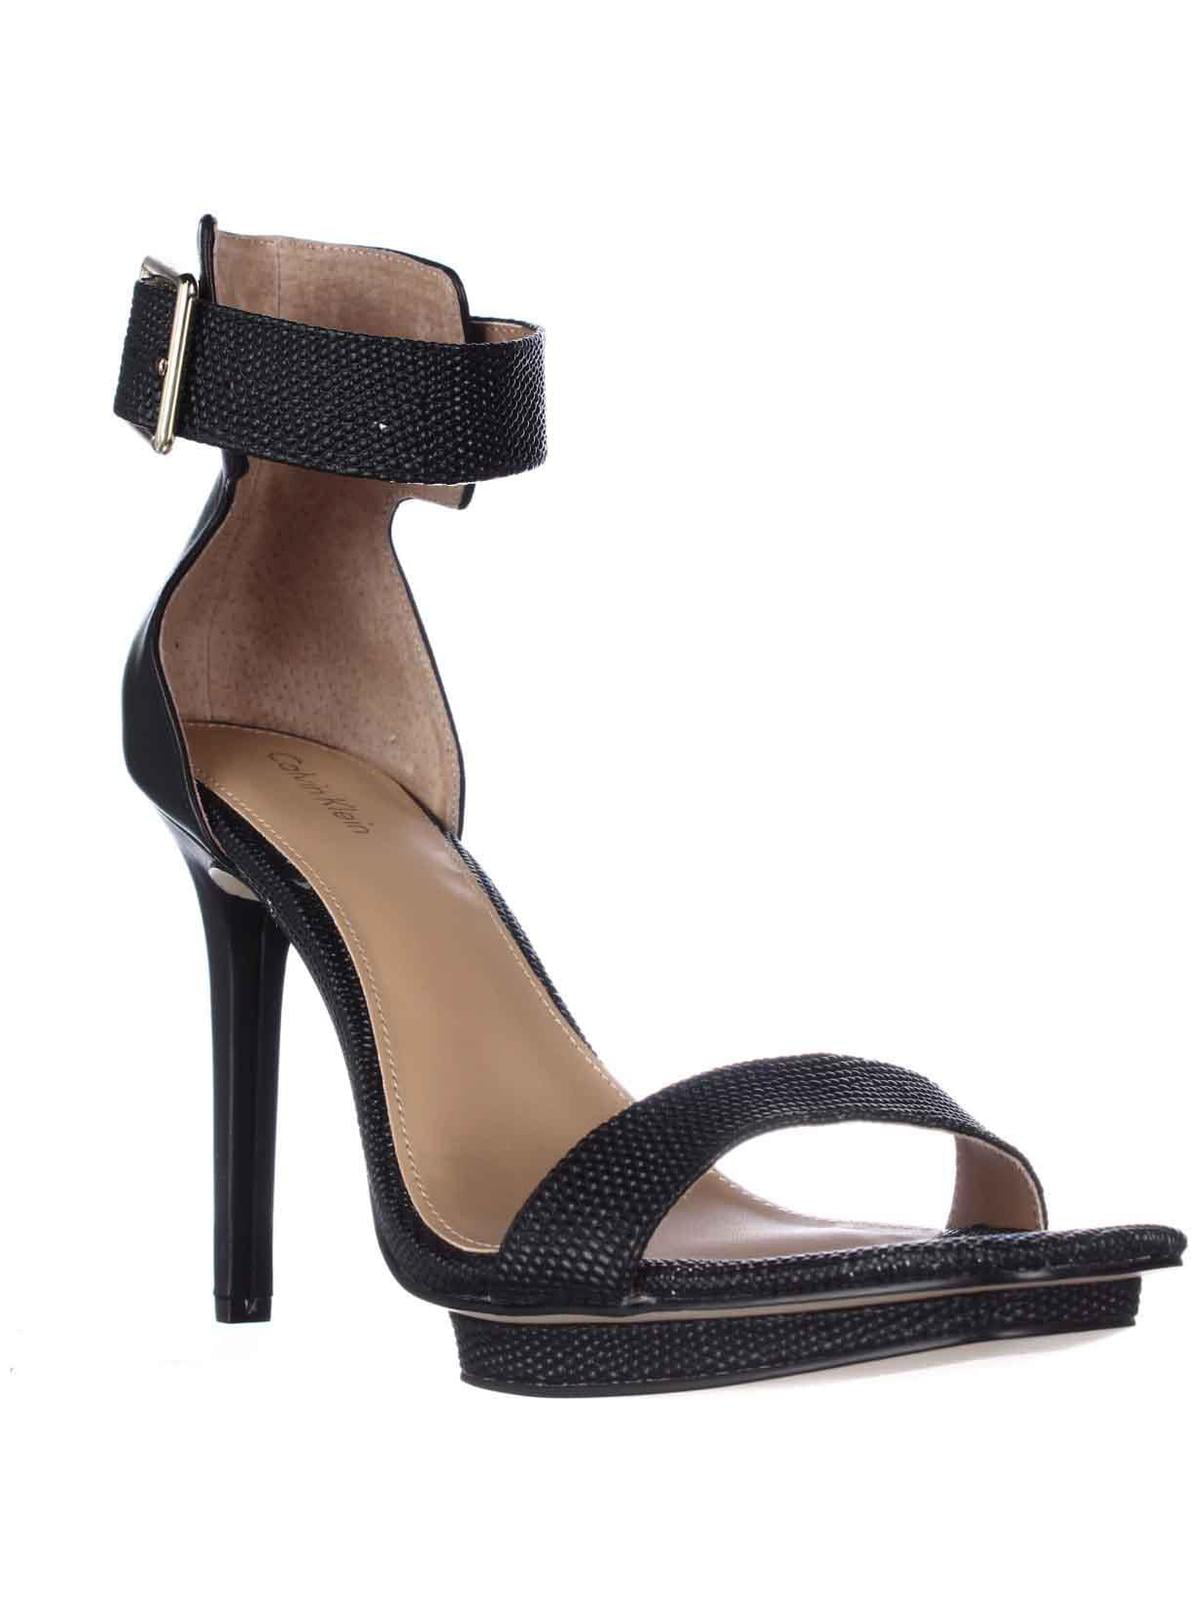 Humiliate In the name Exercise Womens Calvin Klein Vable Ankle-Strap Square Toe Platform Sandals, Black -  Walmart.com